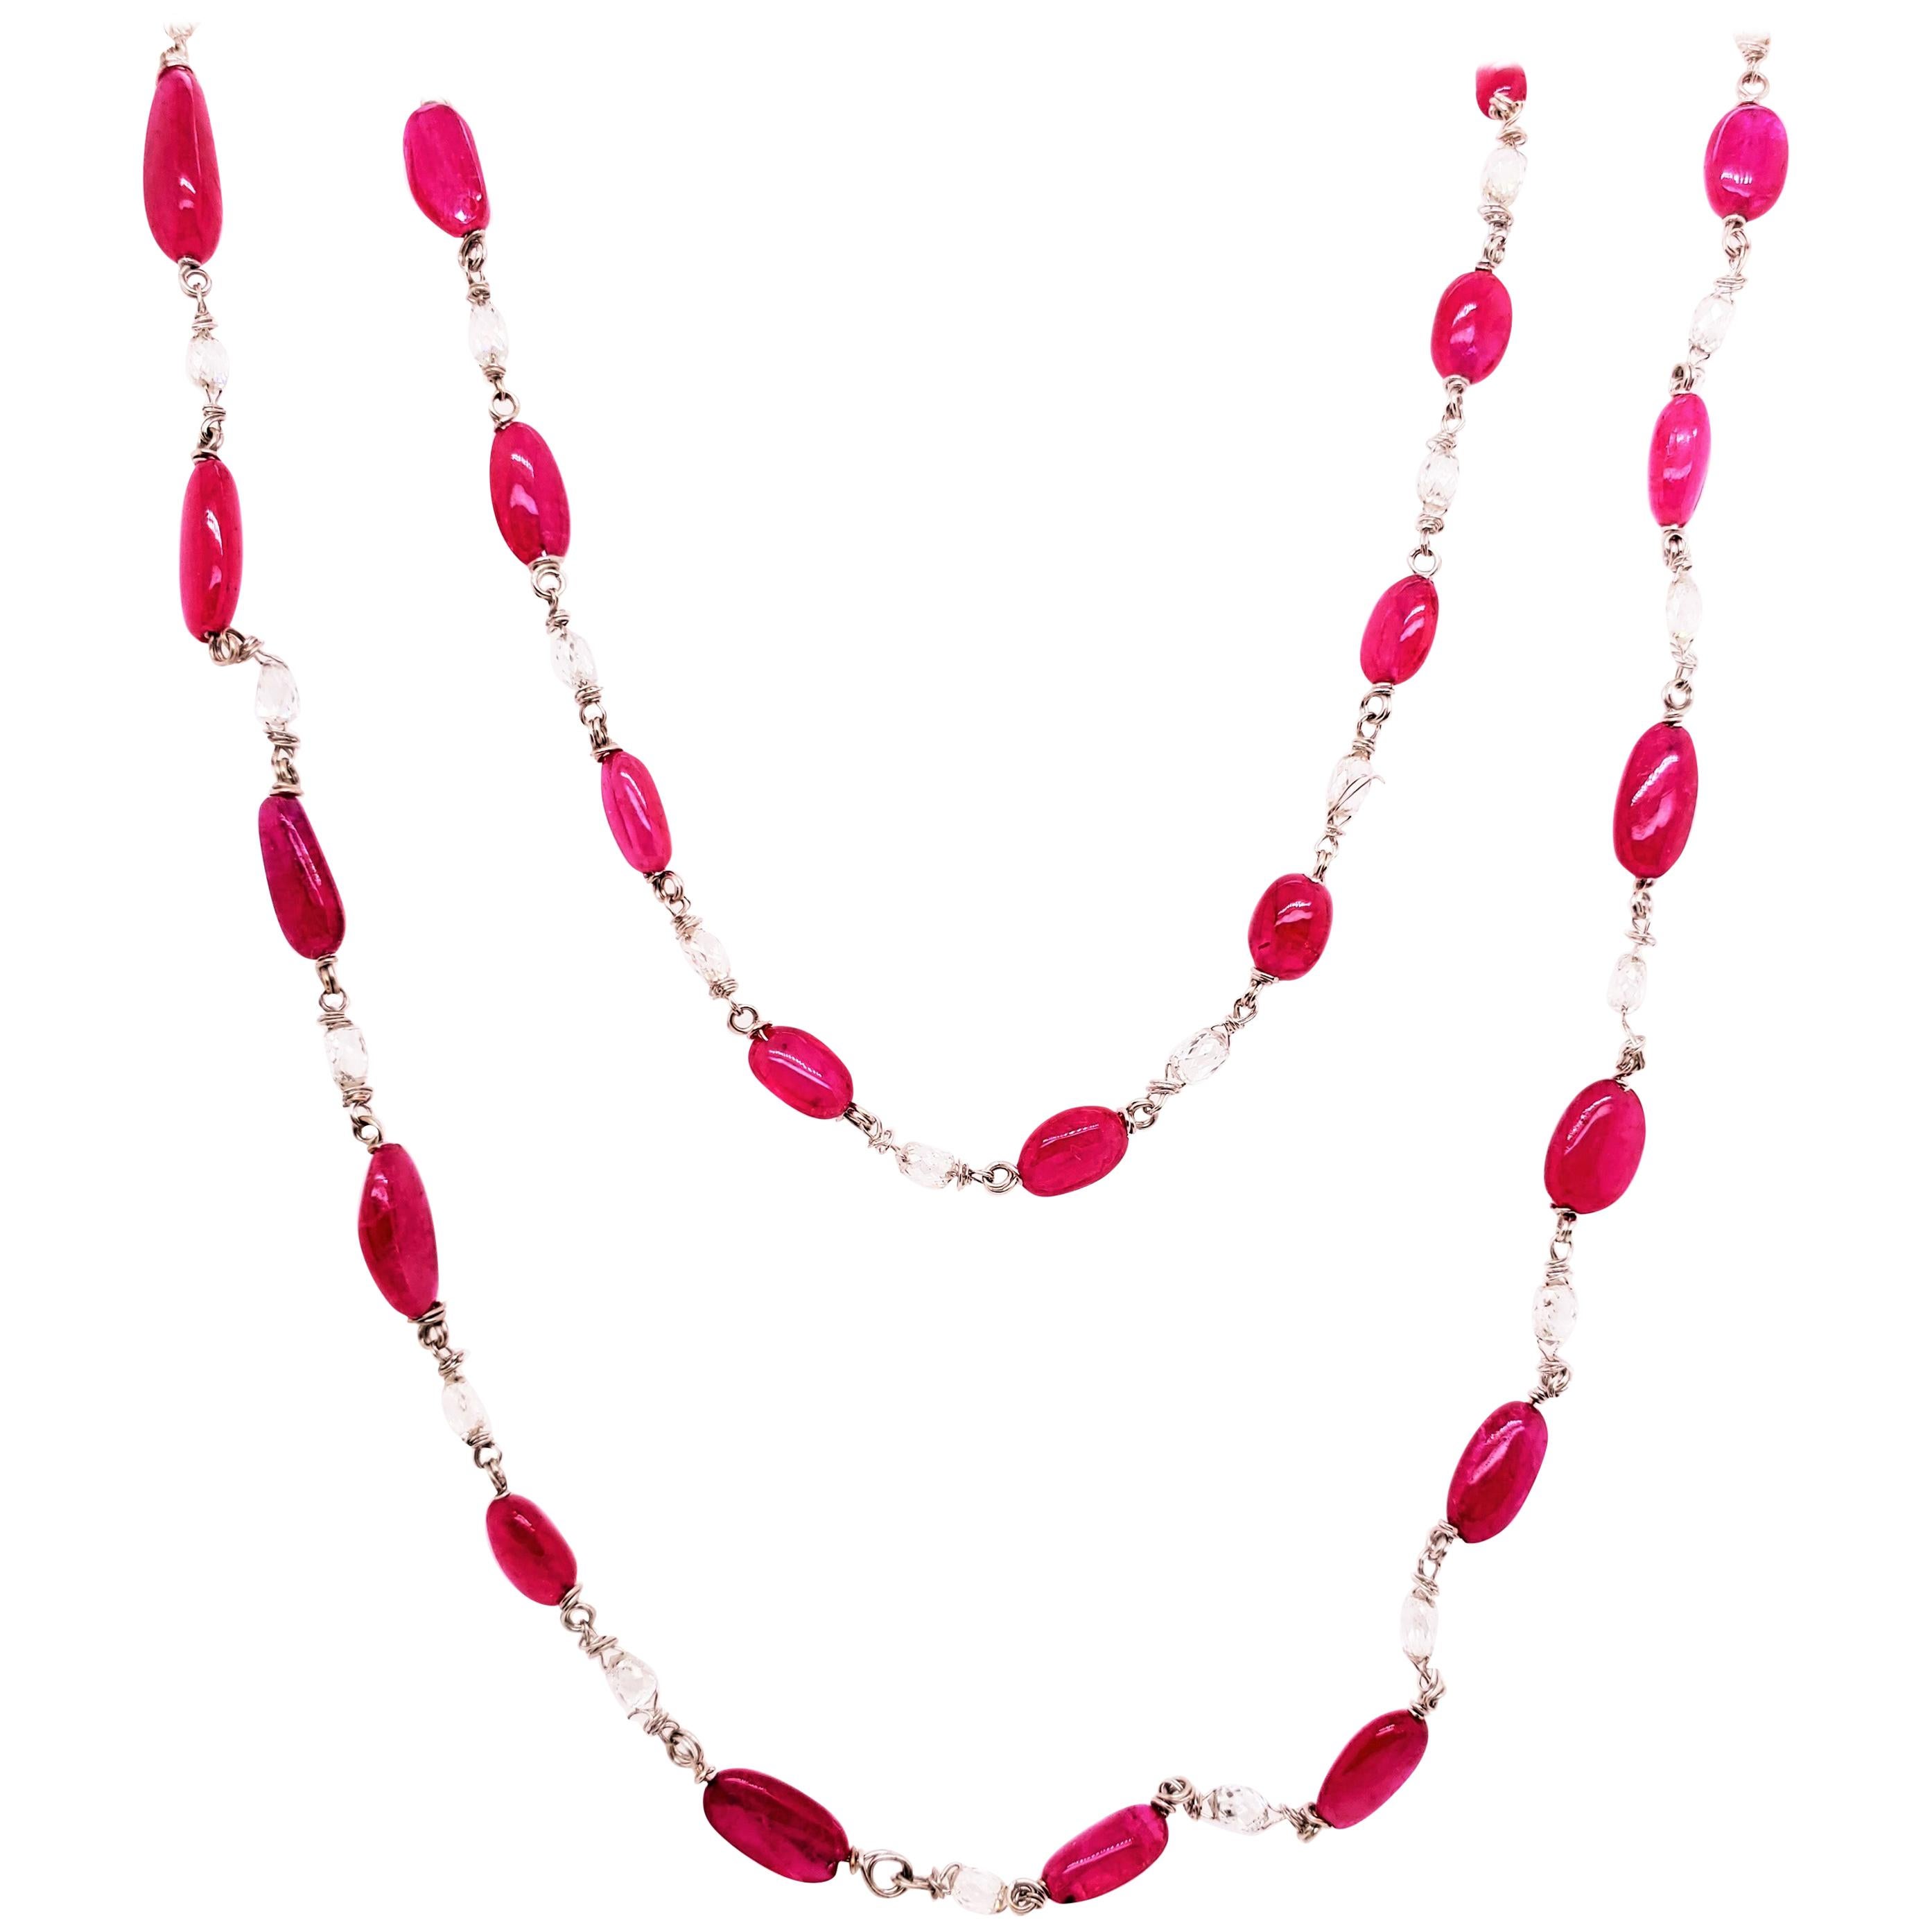 Vivid Red Ruby Beads and Diamond Briolette White Gold Necklace (Collier en or blanc) en vente